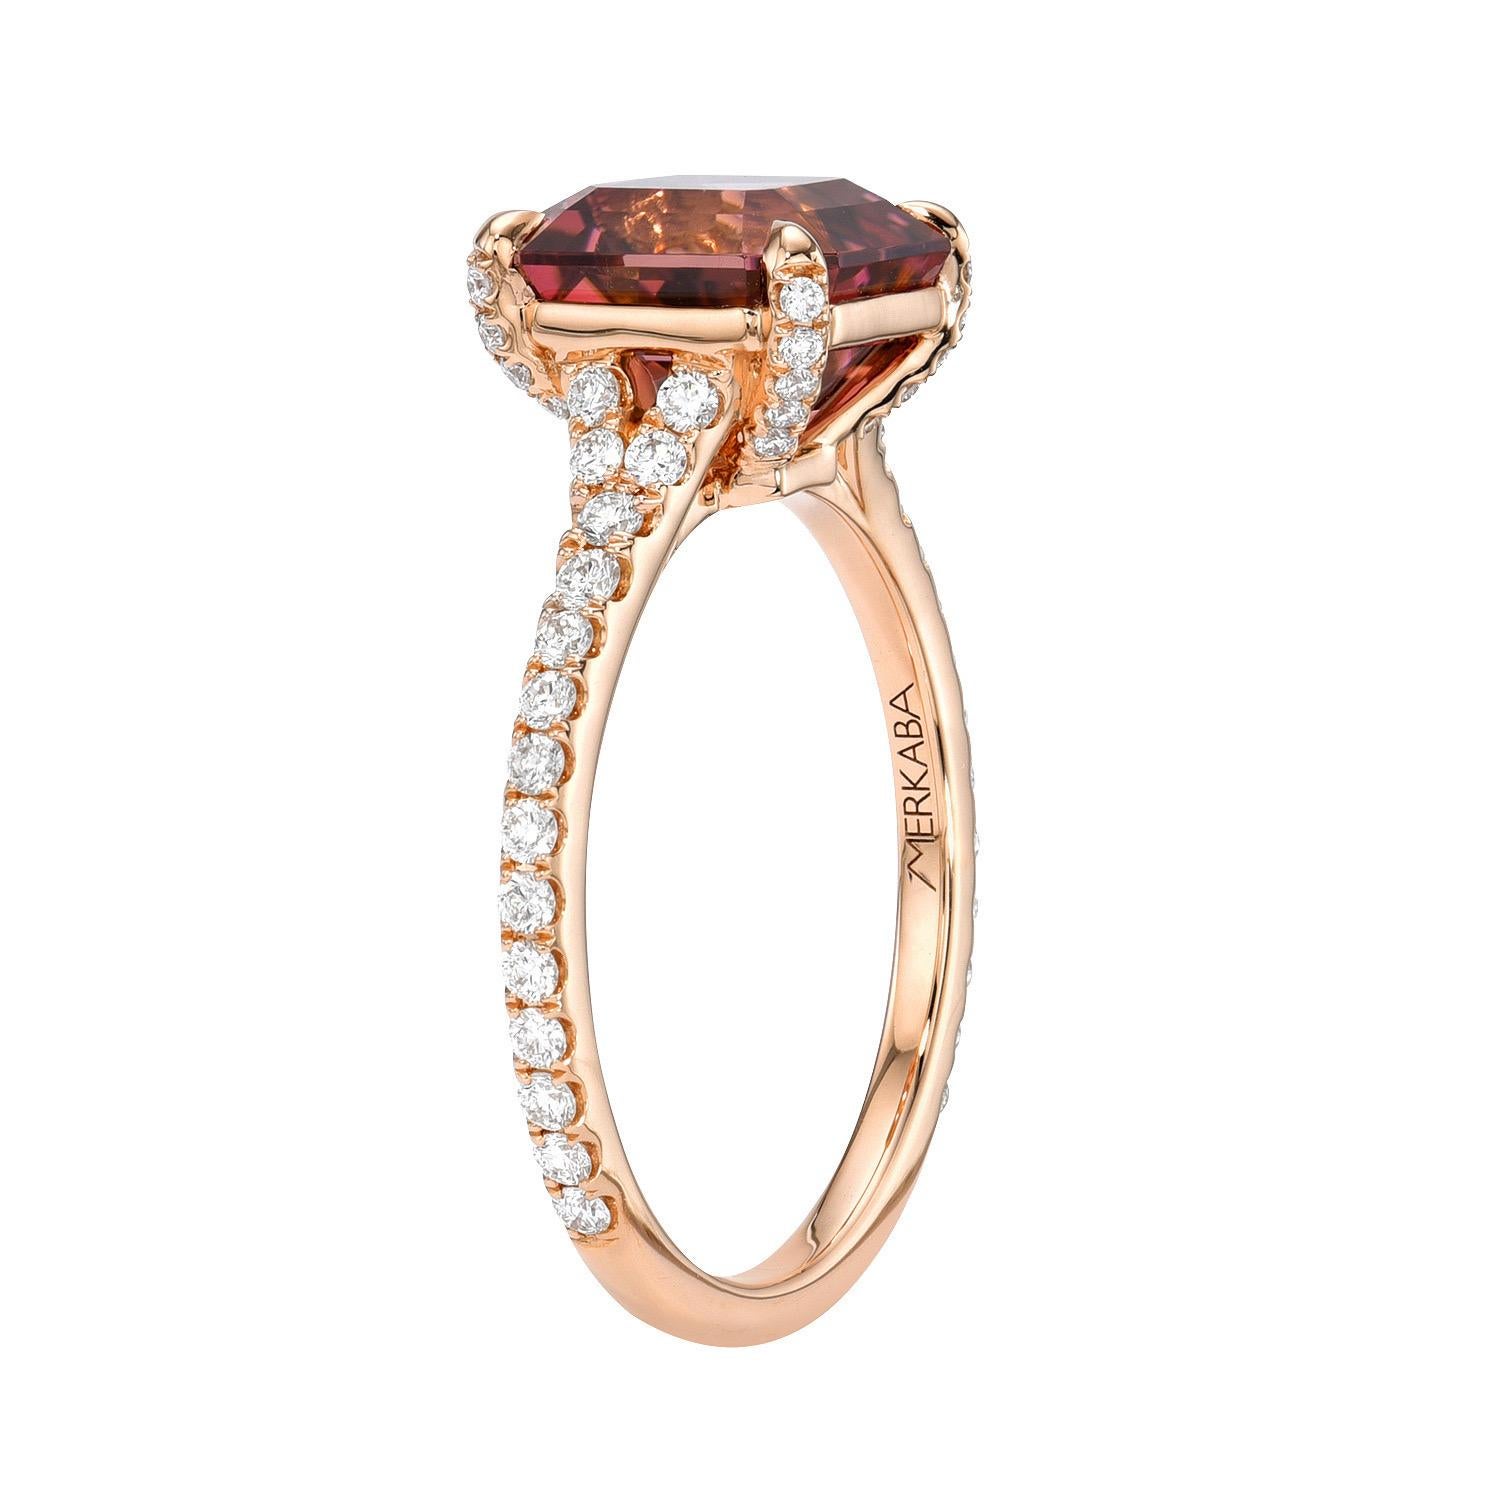 Splendid 3.11 carat Pink Tourmaline square emerald-cut, 18K rose gold ring, decorated with a total of 0.43 carat round brilliant diamonds.
Ring size 6.5. Resizing is complementary upon request.
Returns are accepted and paid by us within 7 days of